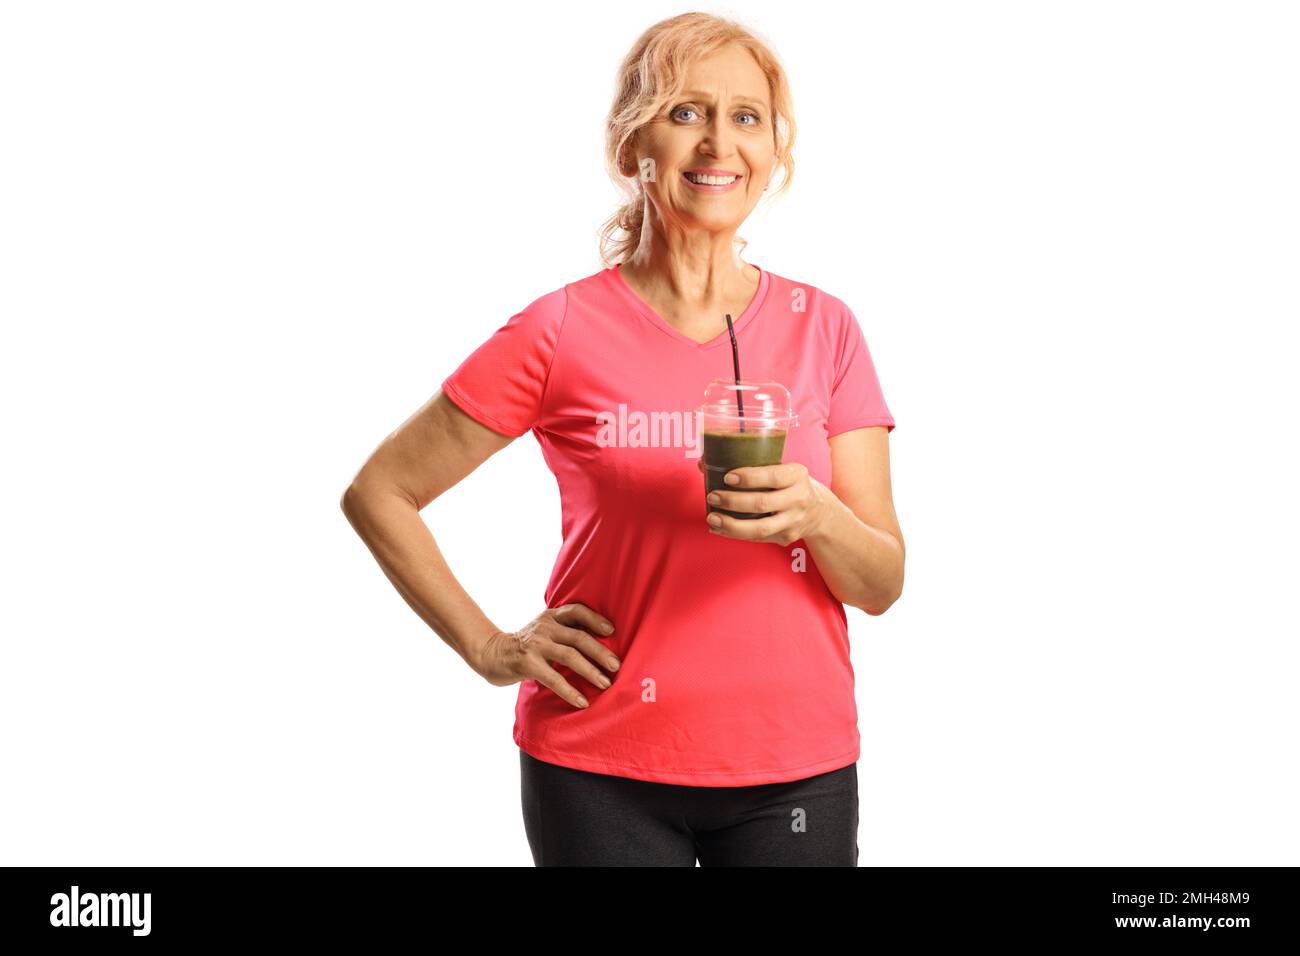 https://c8.alamy.com/comp/2MH48M9/mature-woman-holding-a-healthy-green-smoothie-in-a-plastic-cup-isolated-on-white-background-2MH48M9.jpg